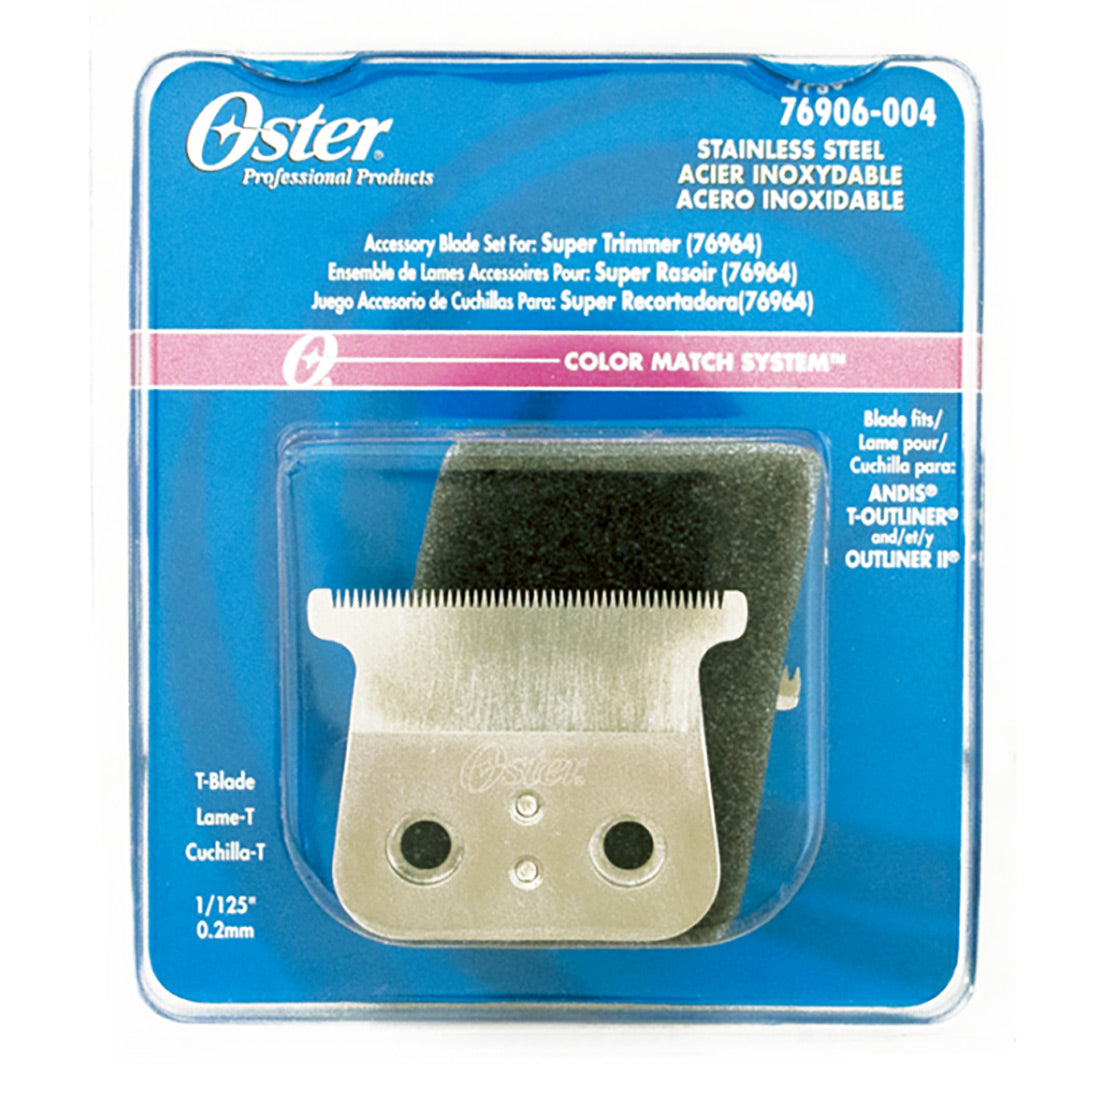 Oster T-Blade for Super Trimmer Replacement Blade 76906-004